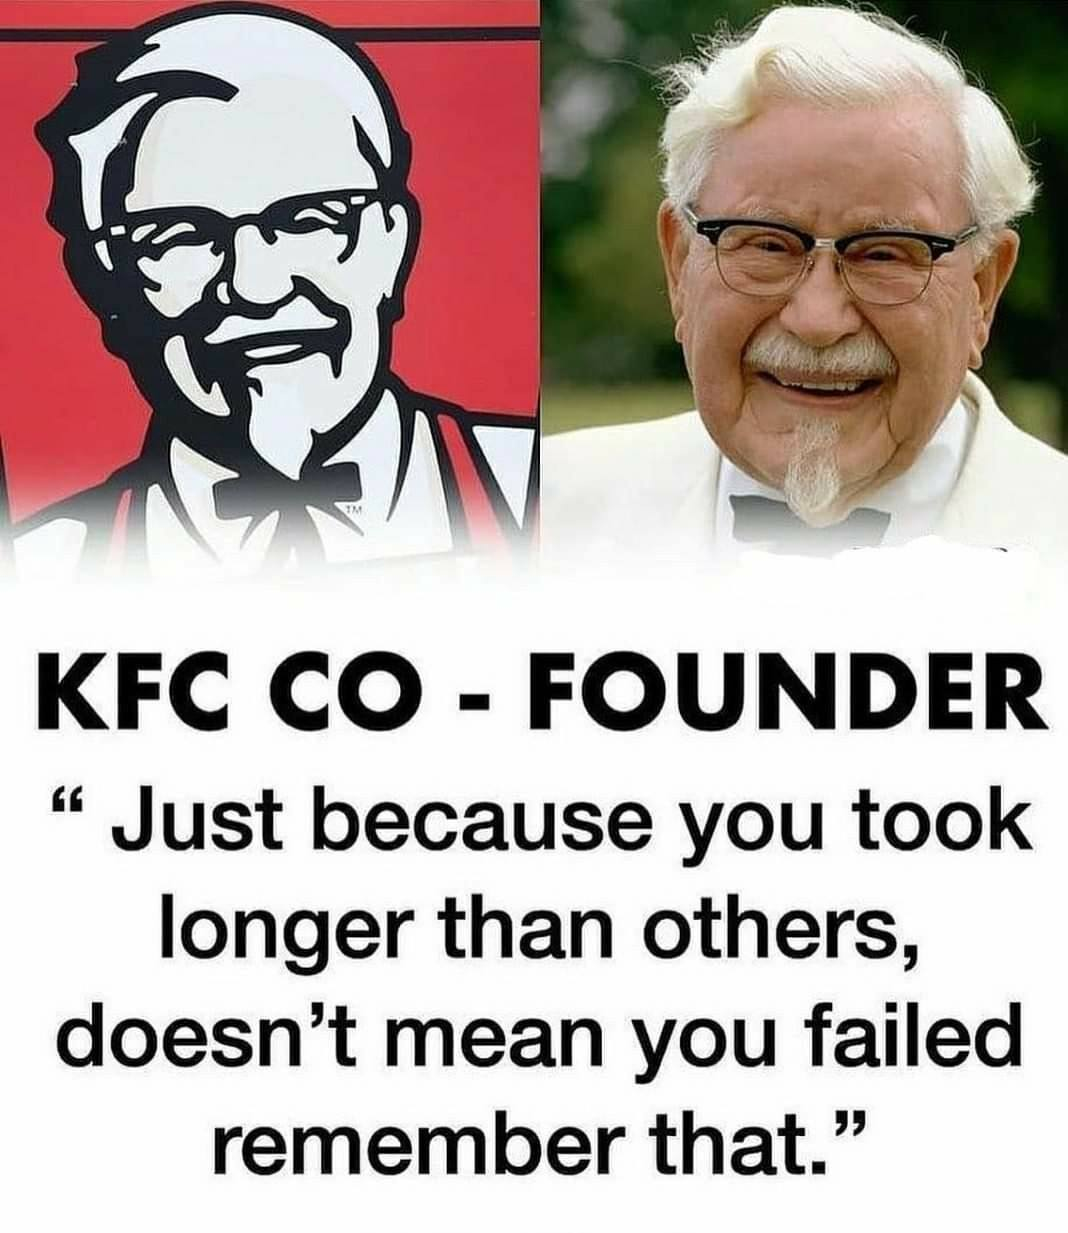 KFC CO - founder "Just because you took longer than others, doesn't mean you failed remember that."